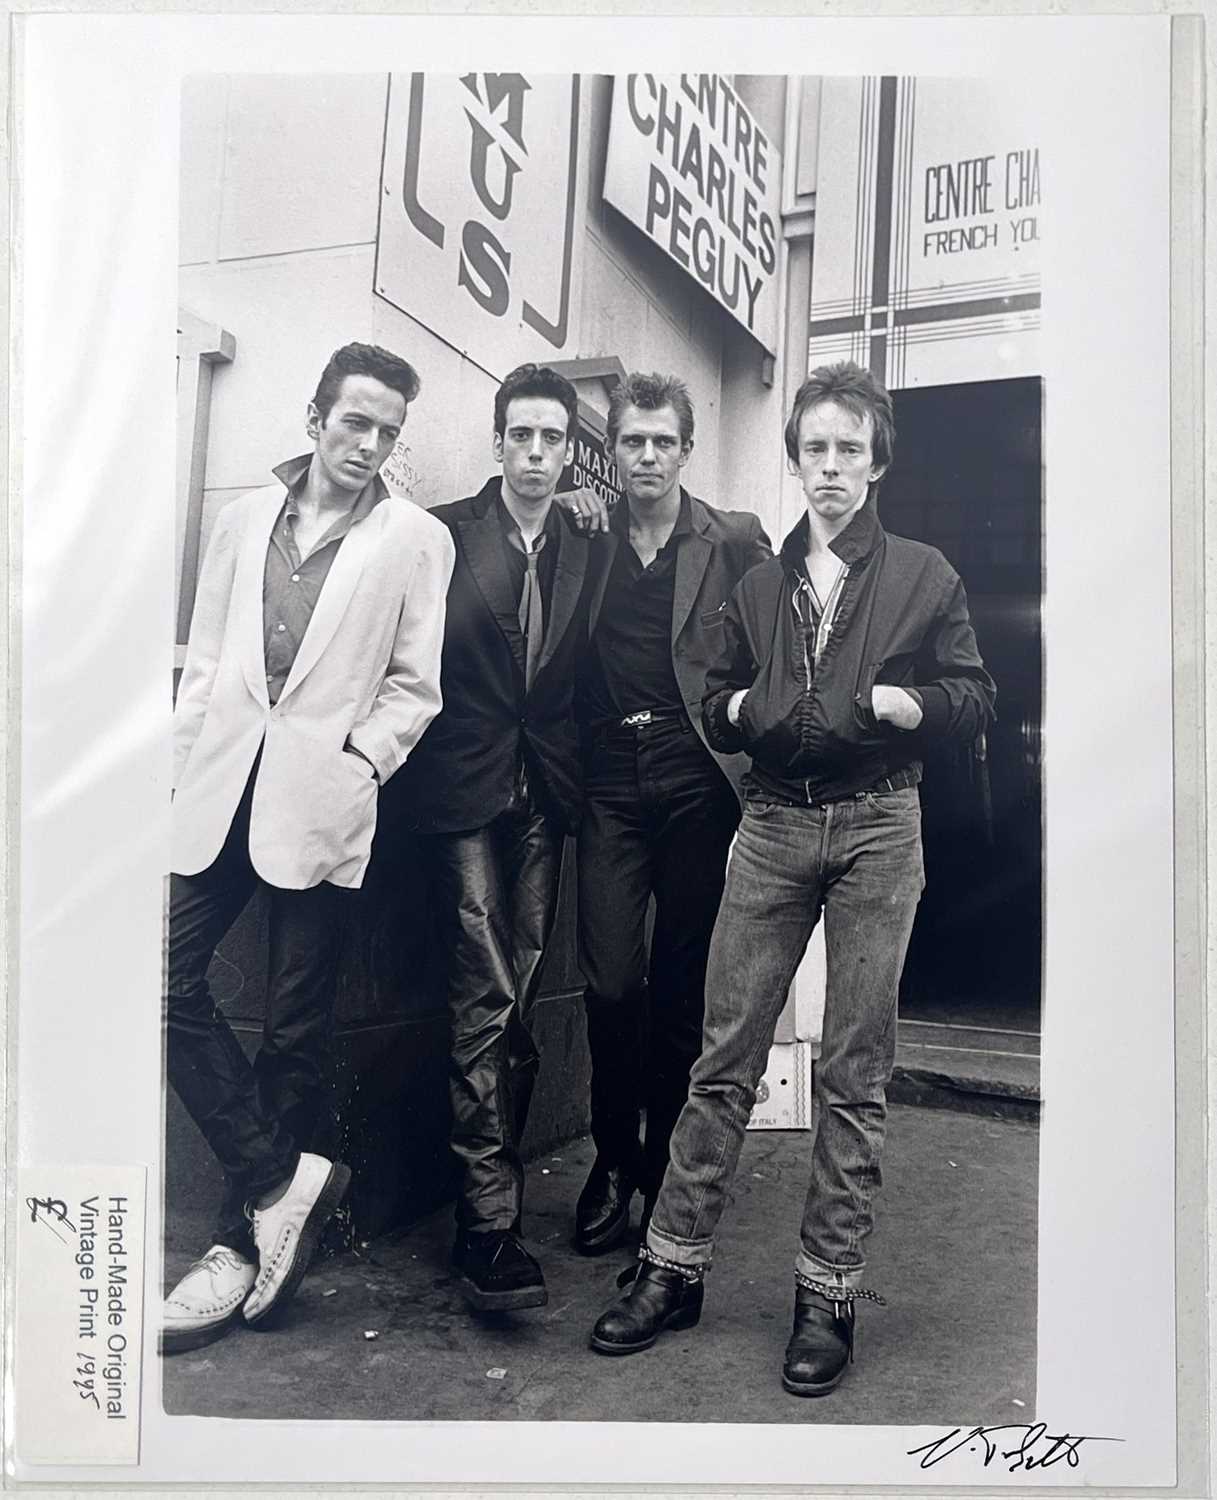 THE CLASH - A VINTAGE PHOTO PRINT OF THE GROUP IN LONDON, 1979 - VIRGINIA TURBETT.